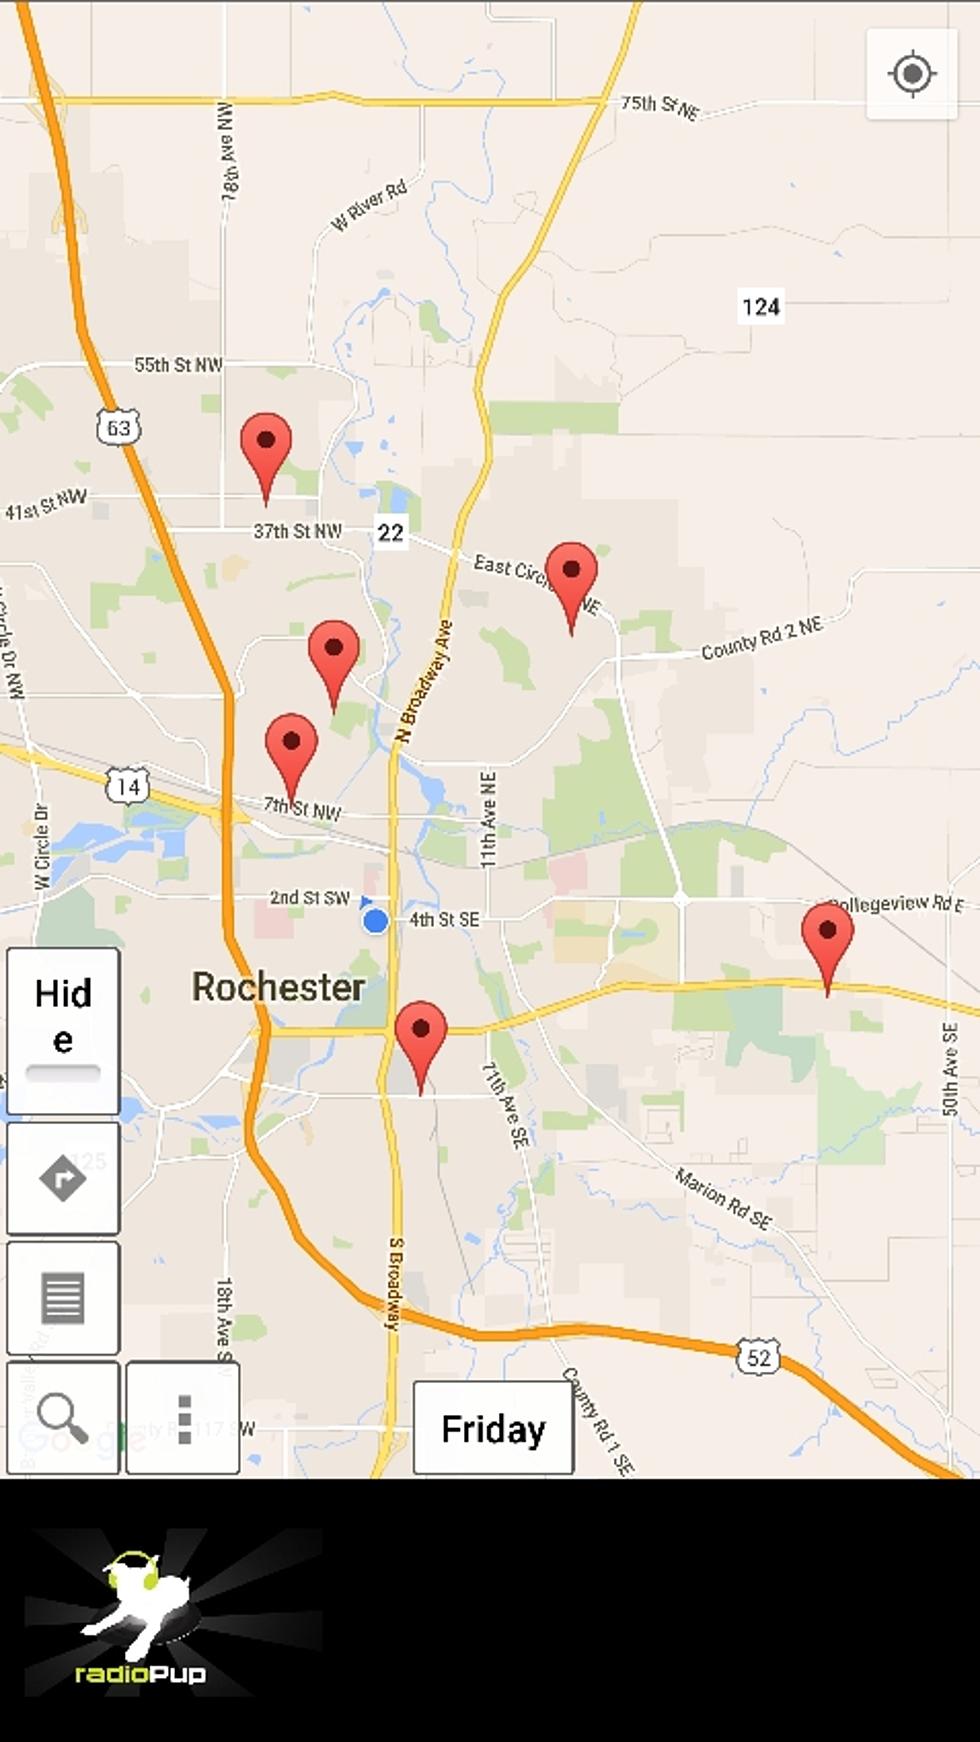 Looking for Garage Sales In Rochester? There’s an App For That